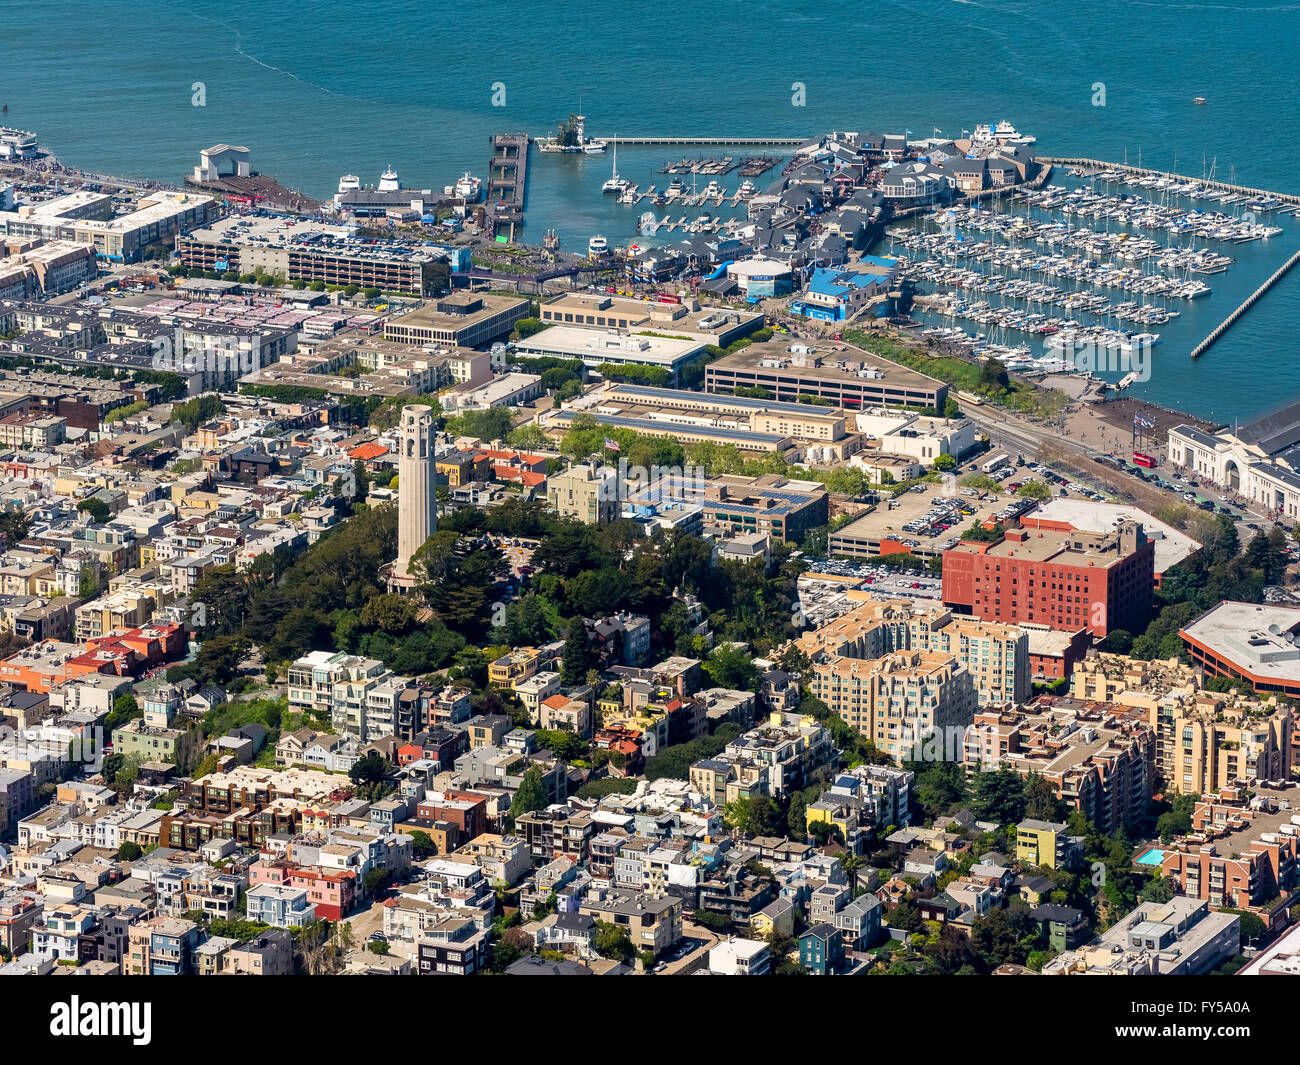 Aerial view, Coit Tower, look-out, district of North Beach, San Francisco, San Francisco Bay Area, California, USA Stock Photo